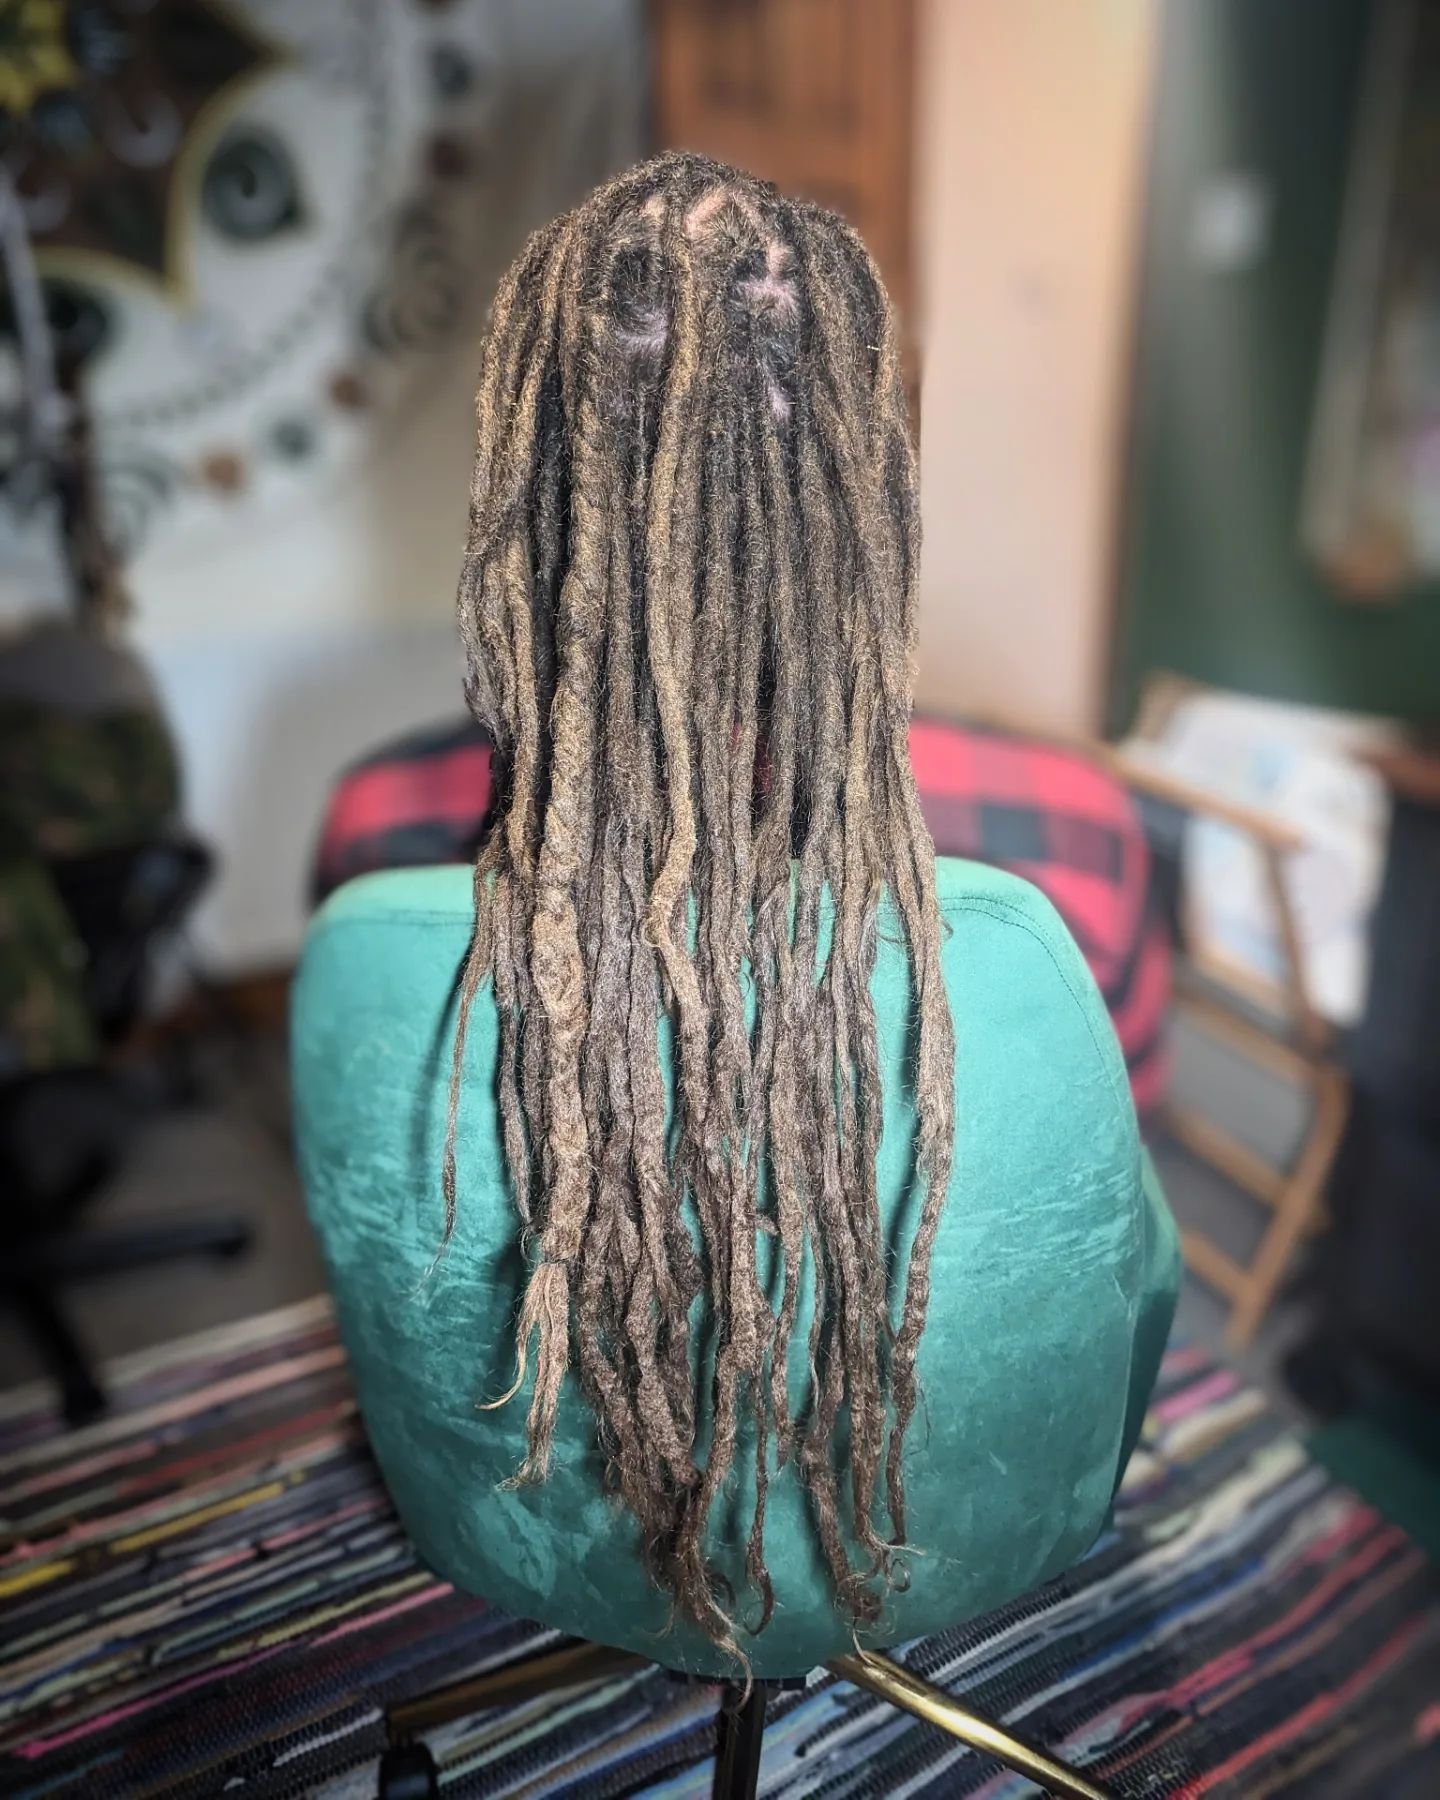 Peter popped by for a root tidy on his dreads the other day. We had a lovely time exchanging crazy travel stories from our times in India while I worked on his dreads.

 It didn't take me long to get his locs which were free formed looking tidy at th